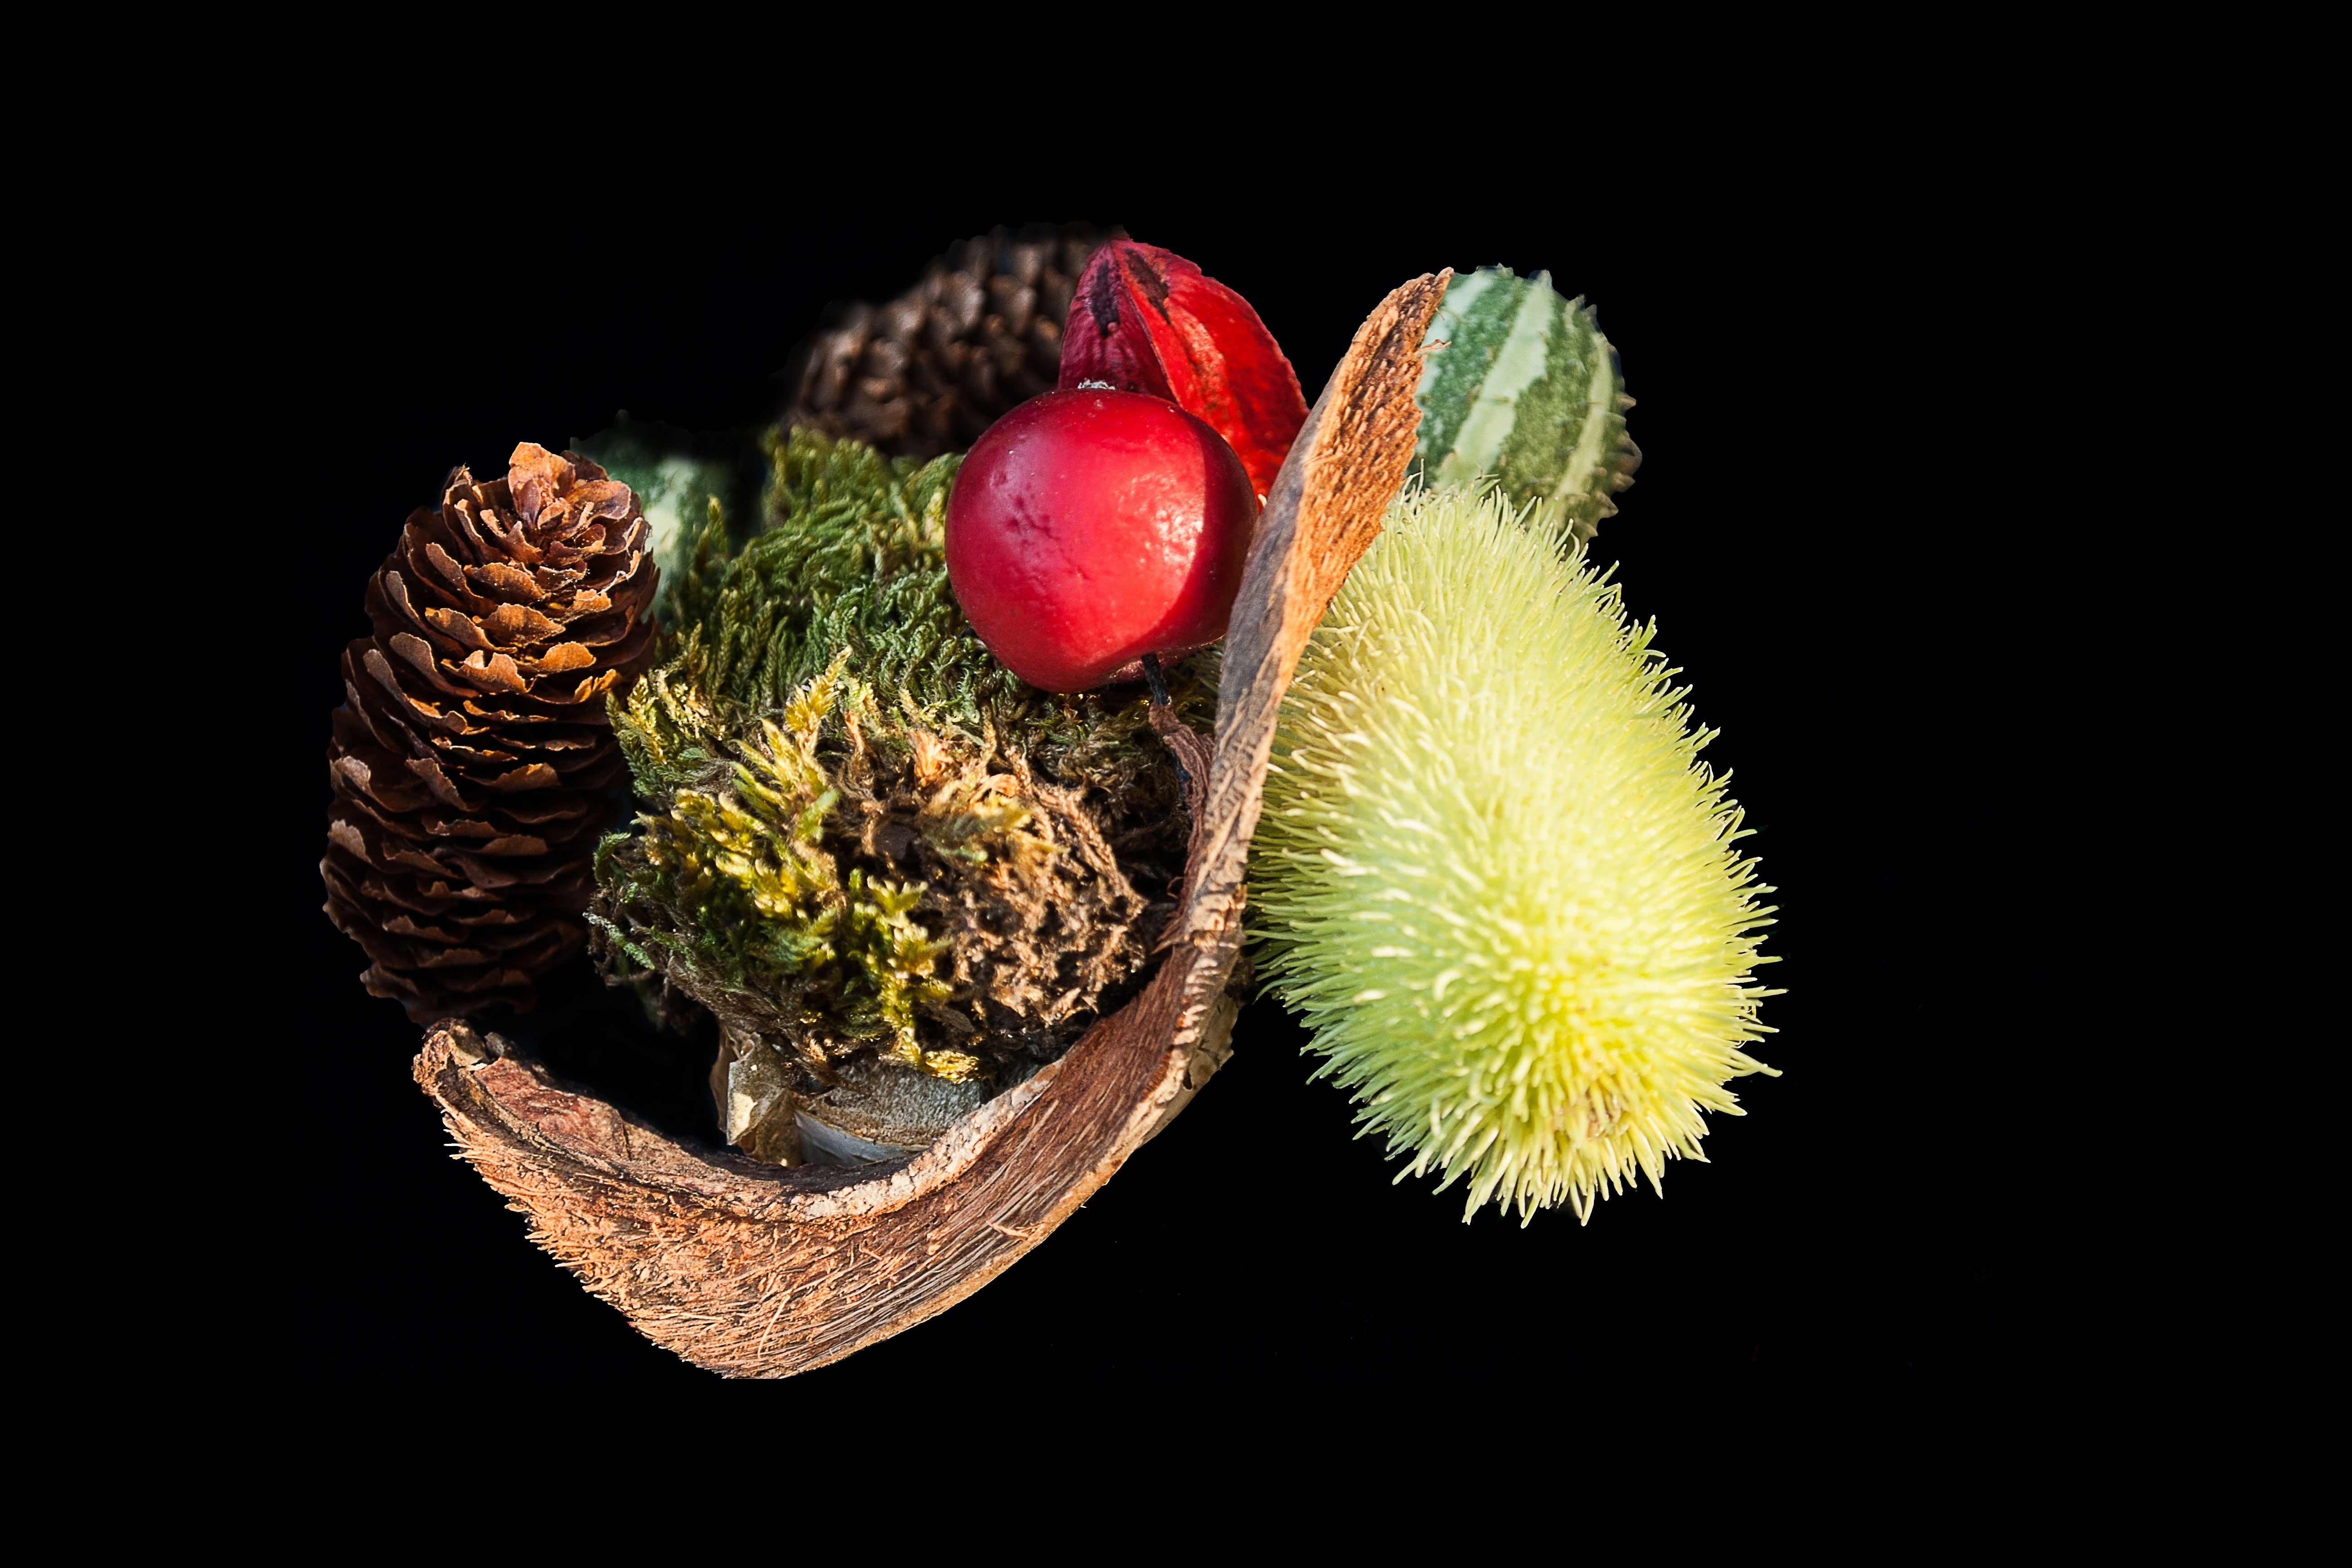 pine cone and red round fruit